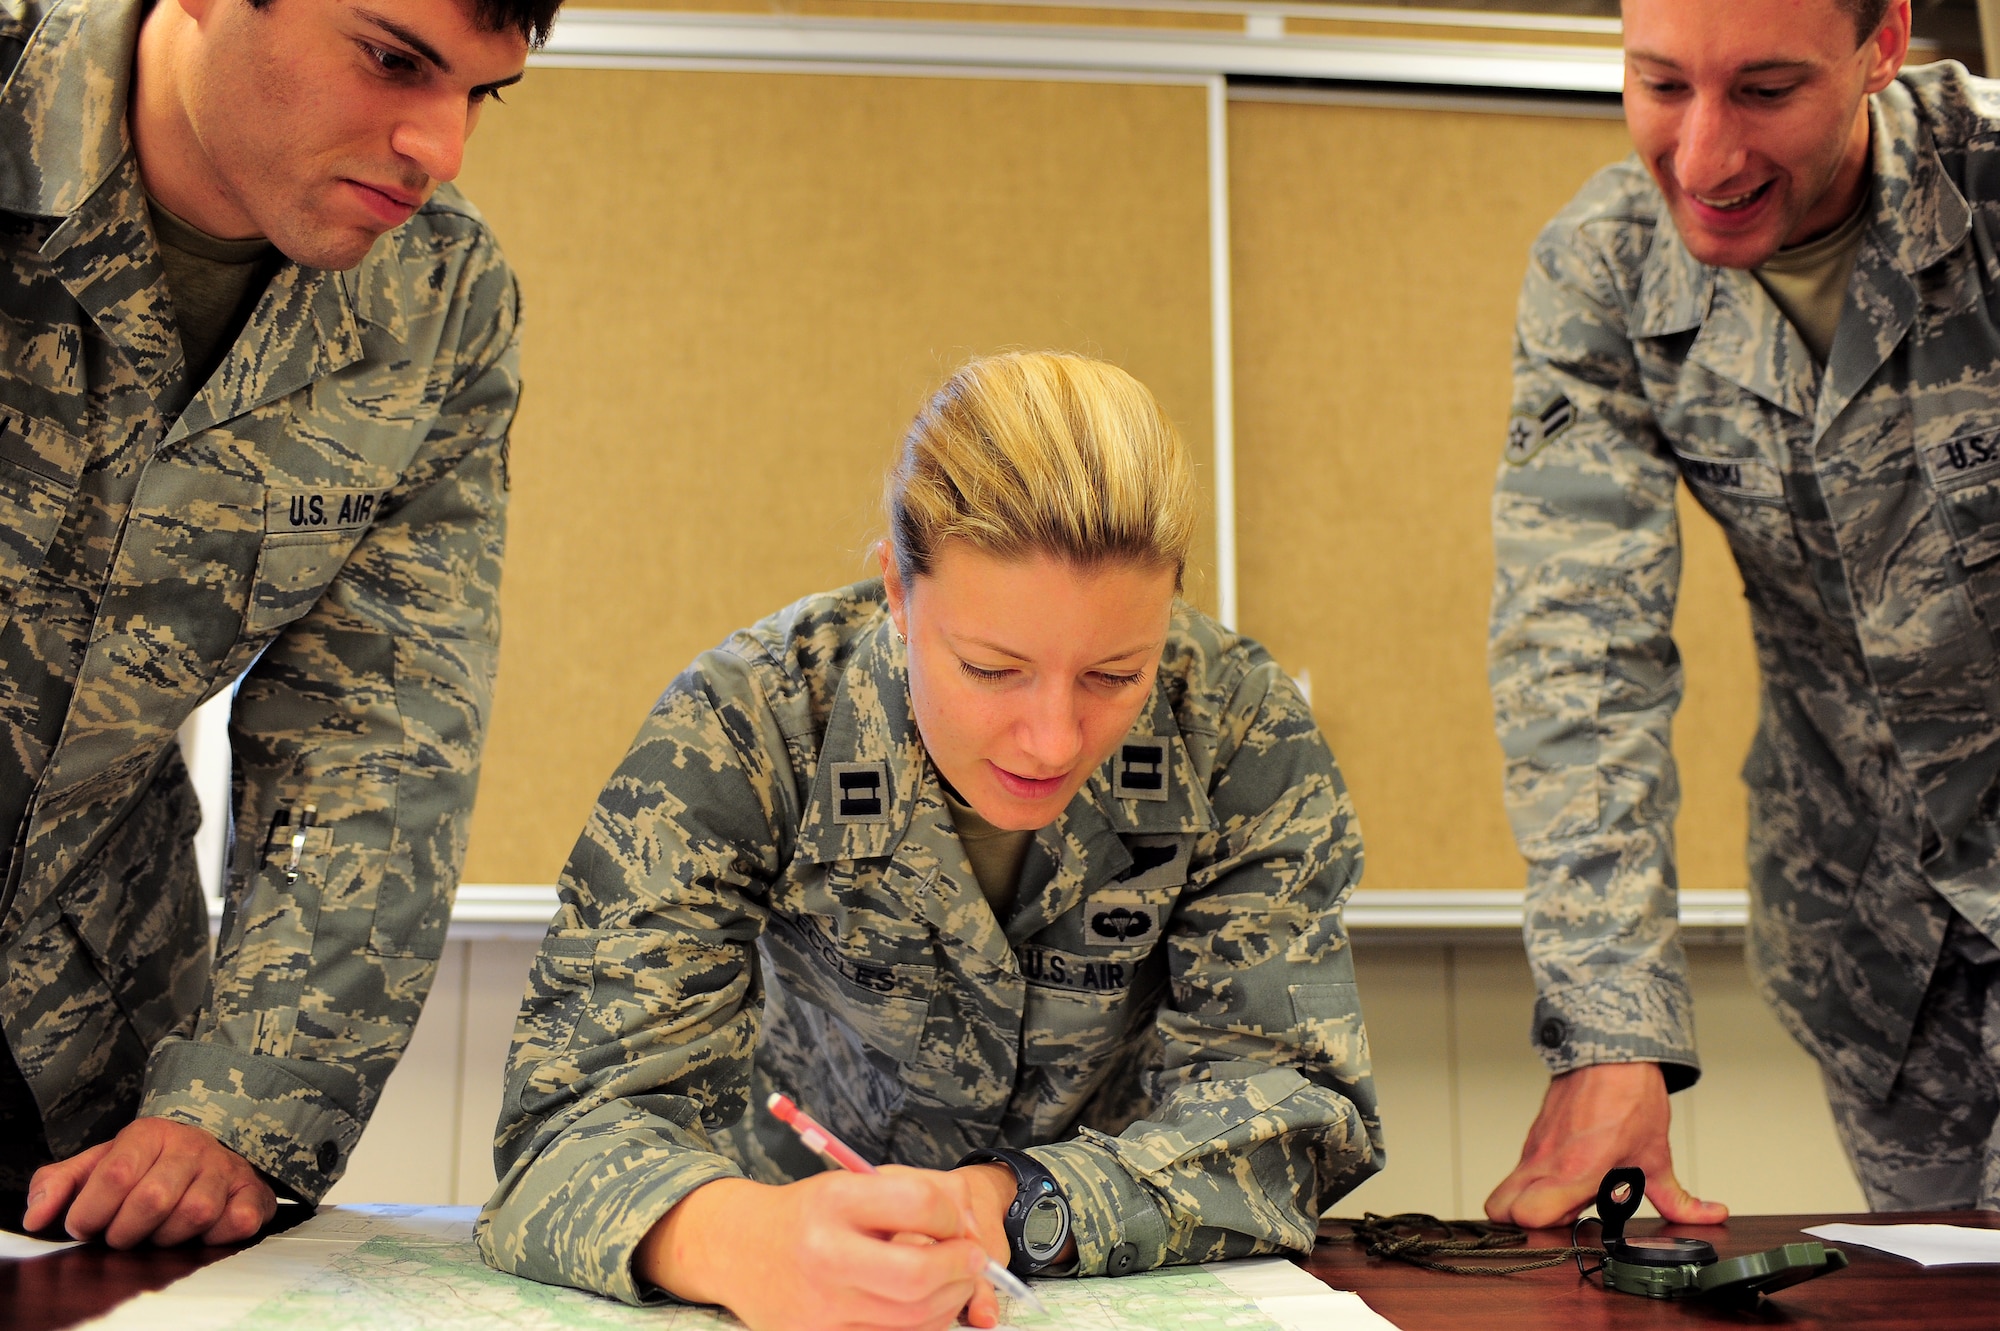 Capt. Sarah Eccles plots coordinates on a map June 10, 2011, as Staff Sgt. Lucas Smith and Airman 1st Class Kyle Gutowski observe. The three are assigned to the 682nd Air Support Operations Squadron at Shaw Air Force Base, S.C.  Captain Eccles, an F-16 Fighting Falcon pilot, currently is serving in a career-broadening assignment as an air liaison officer in the 682nd ASOS.  (U.S. Air Force photo/Airman 1st Class Daniel Phelps)